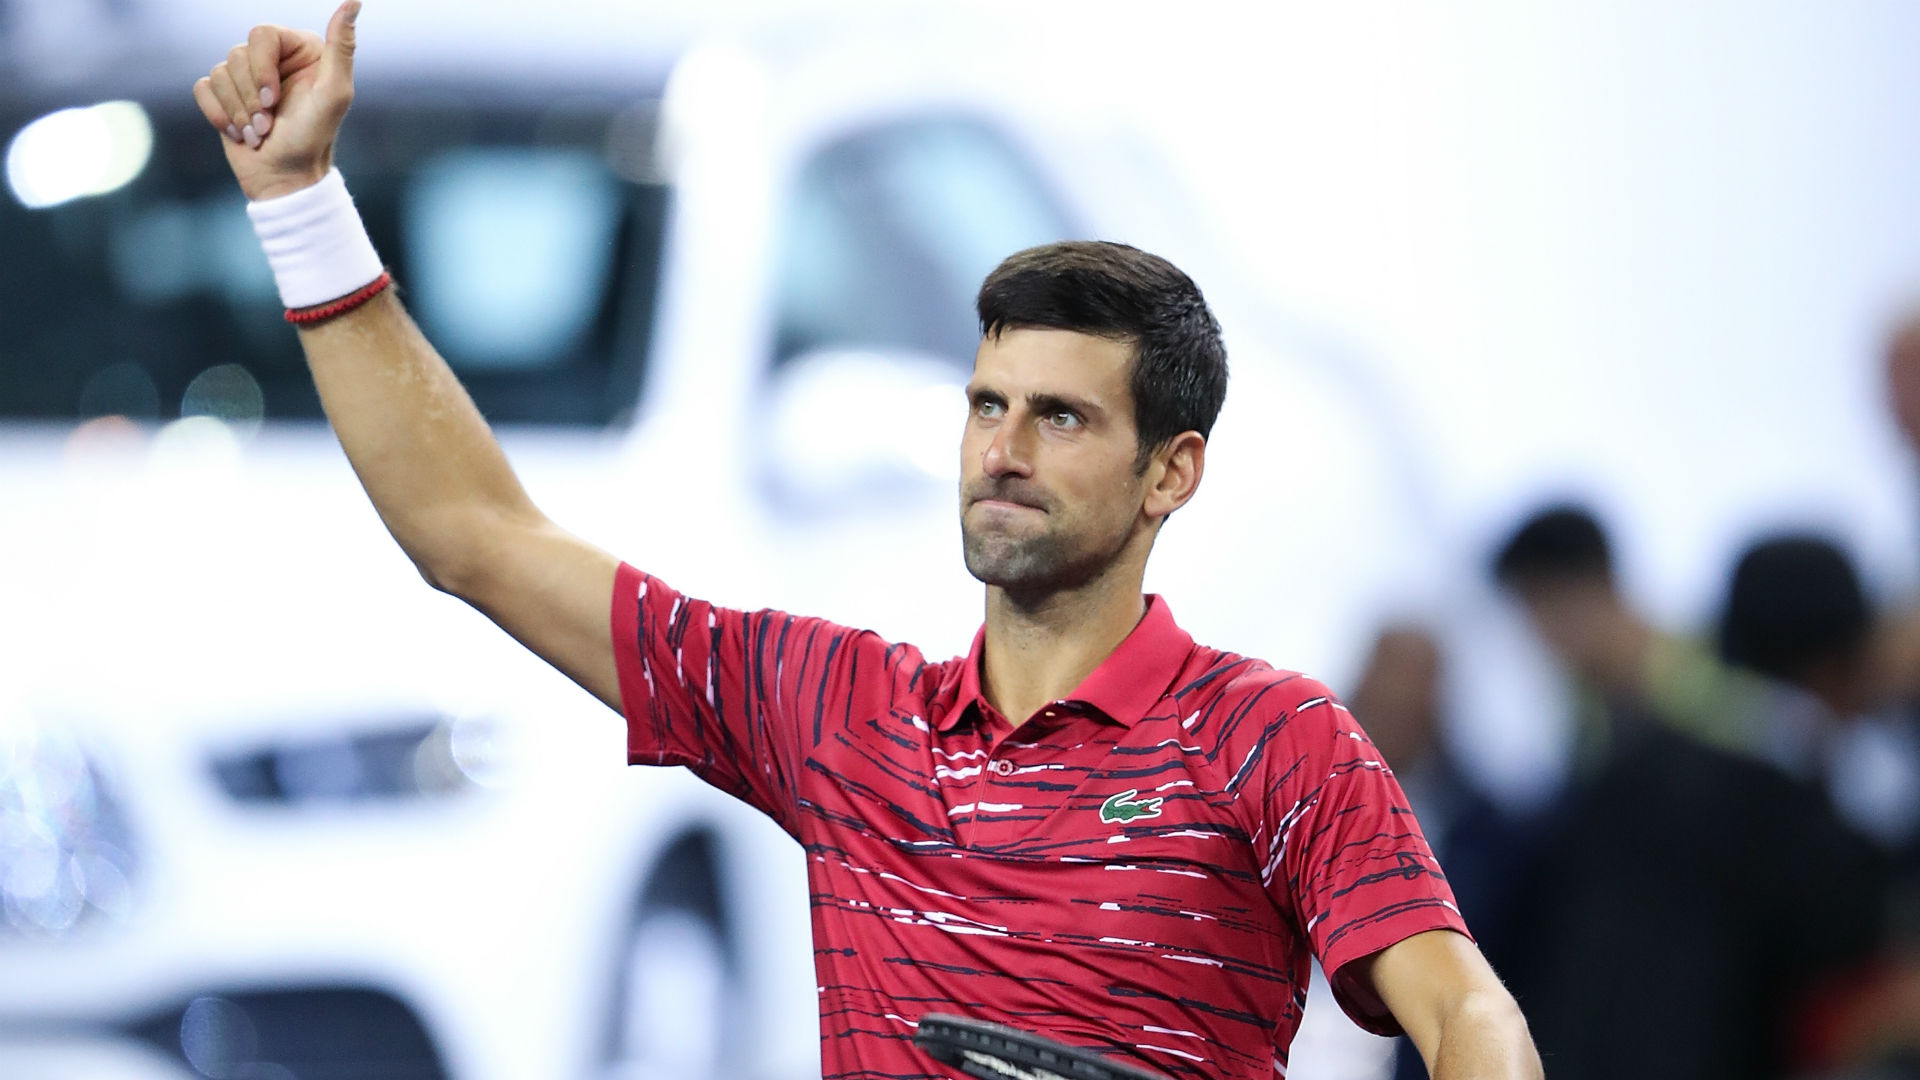 A potential Shanghai Masters double is on the agenda for Novak Djokovic, who faces playing two matches on Thursday.